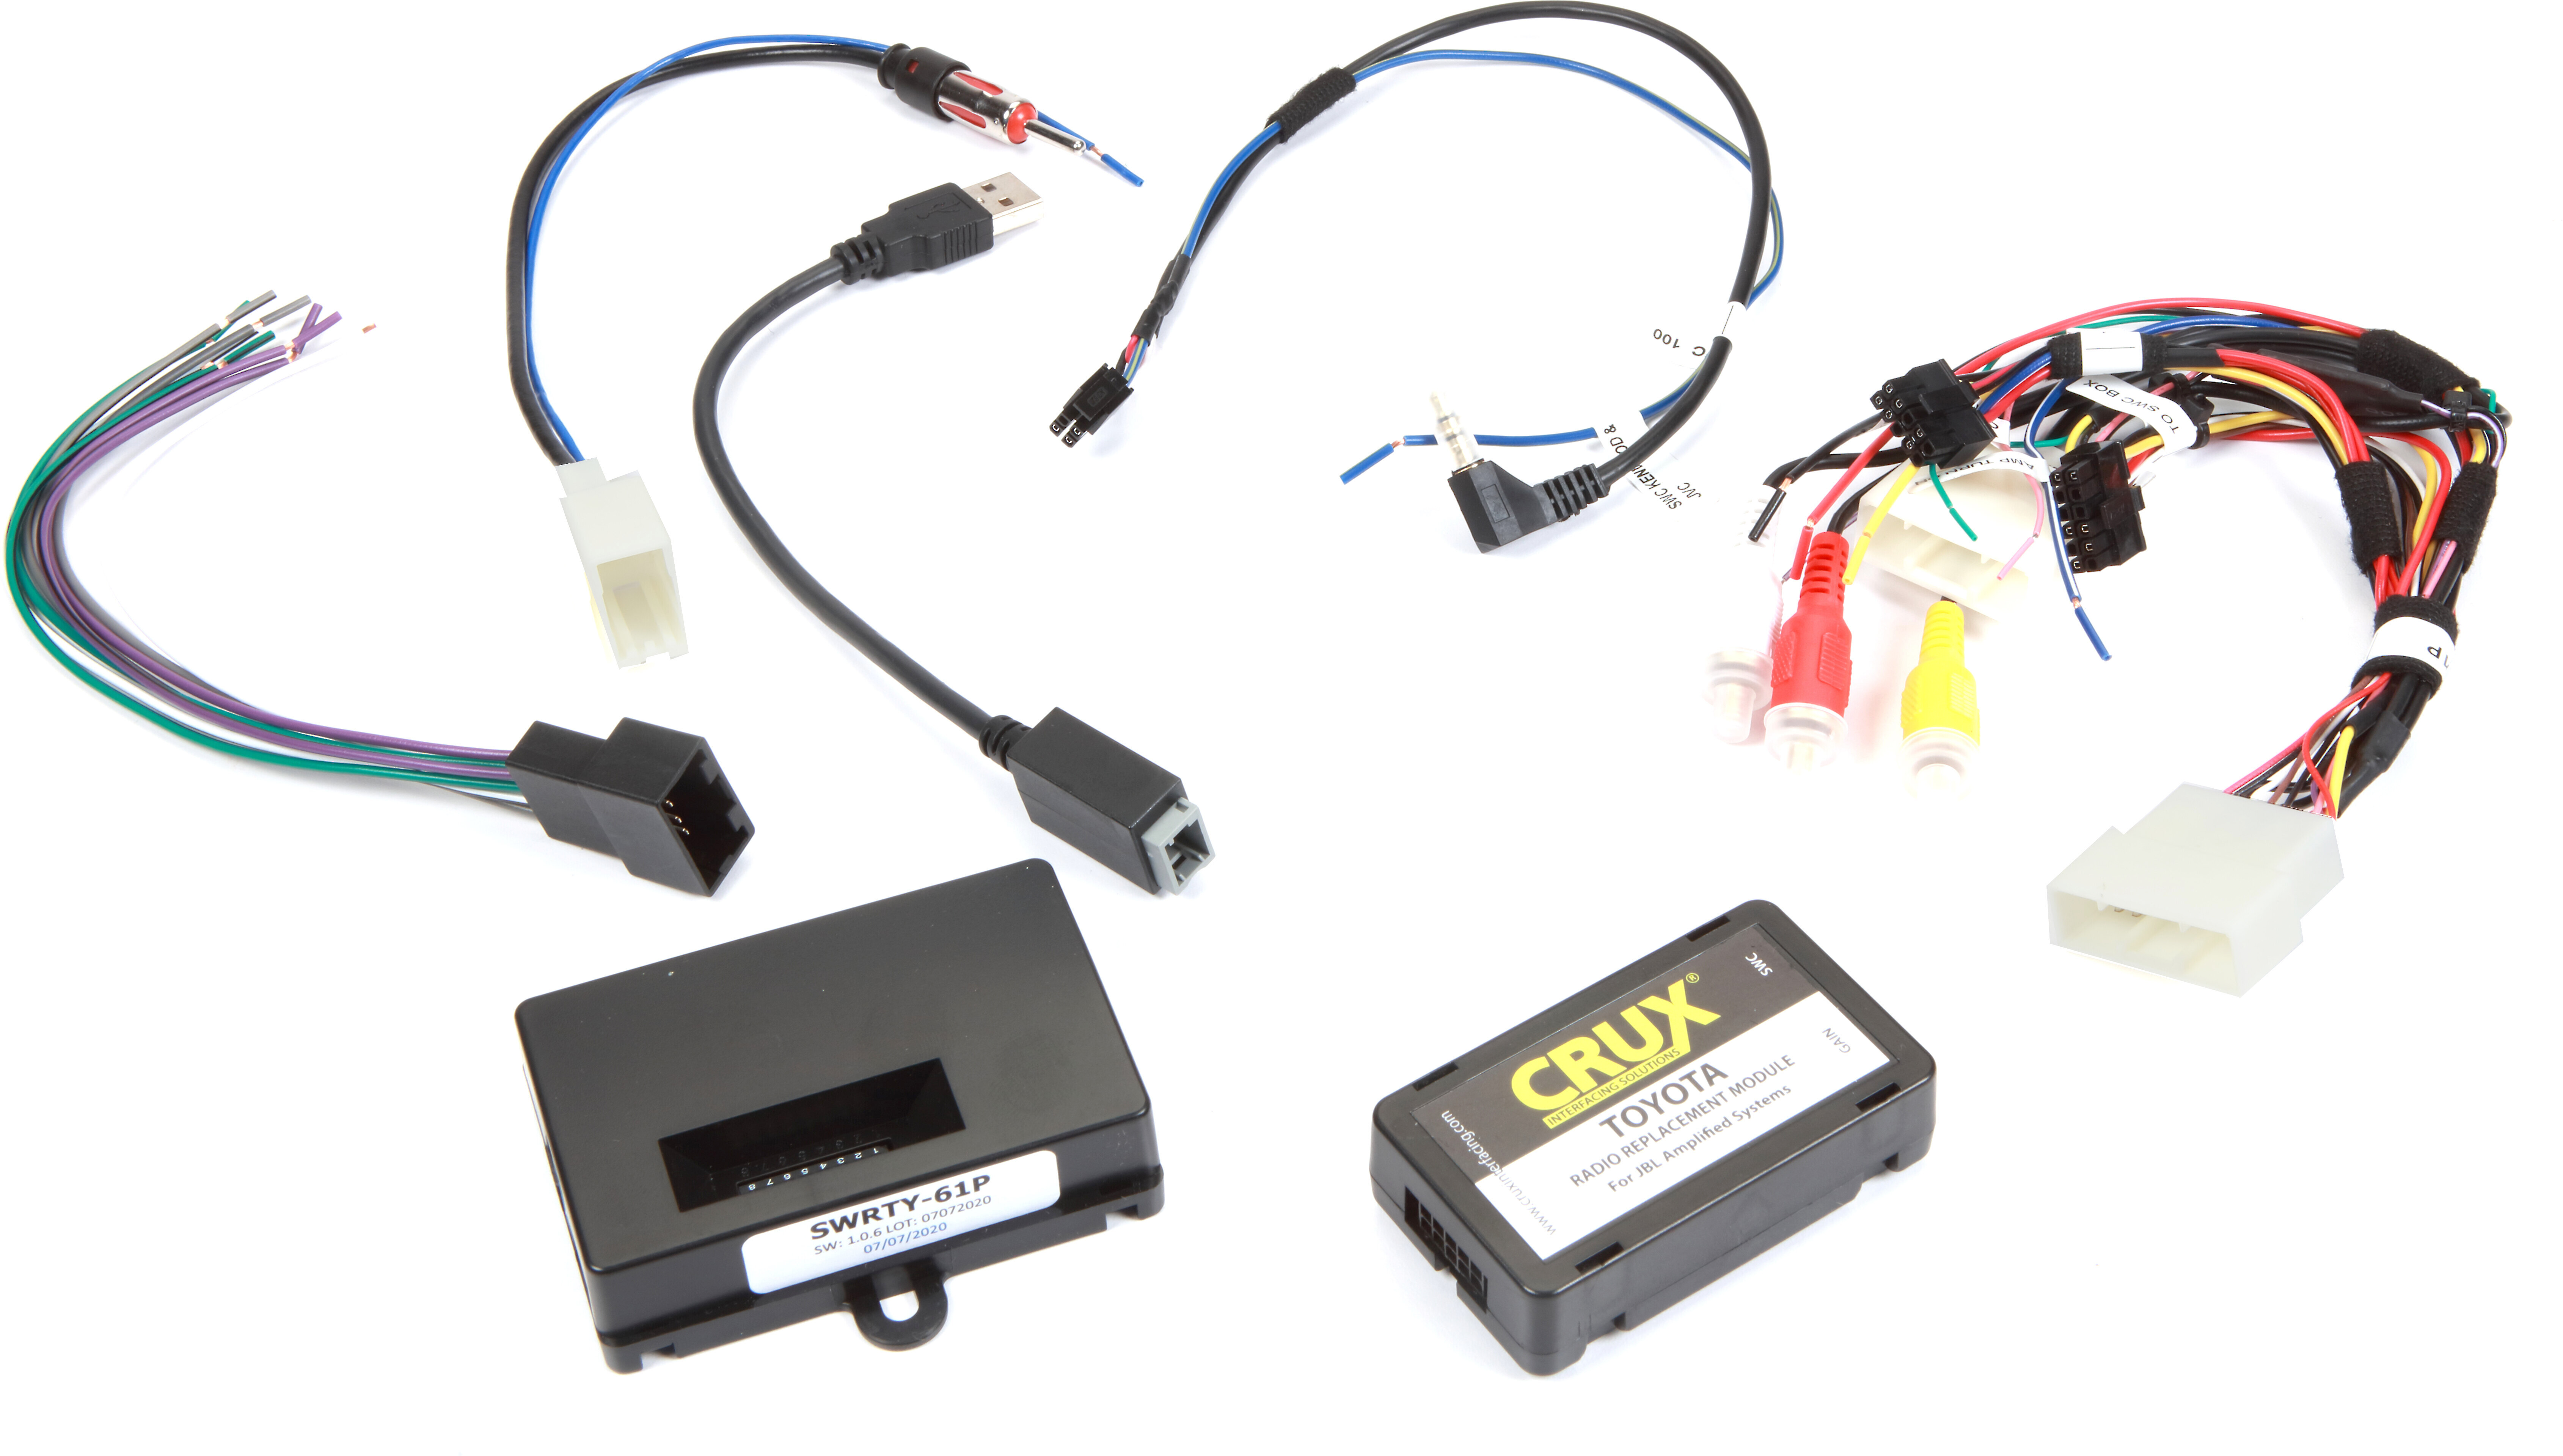 CRUX SWRTY-61P Wiring Interface